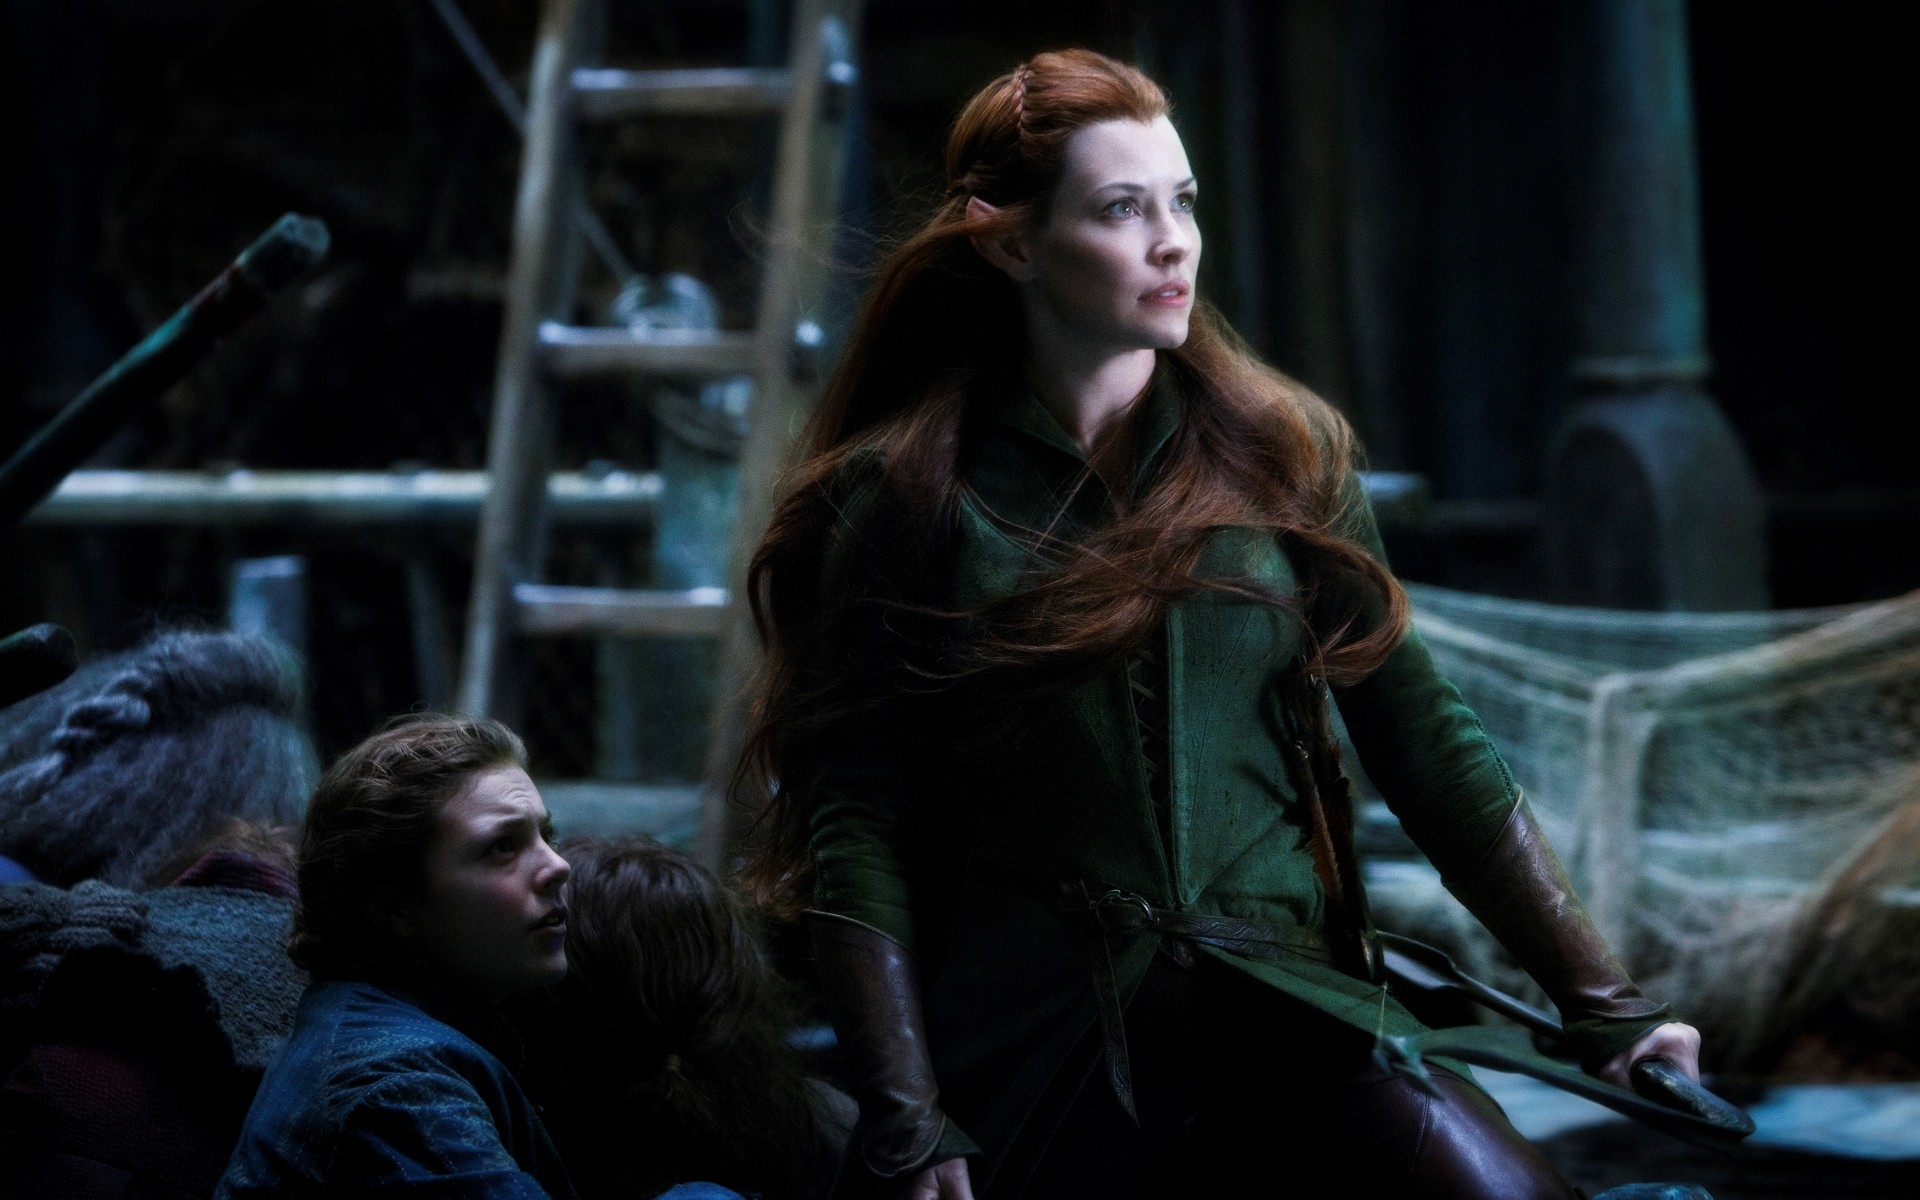 The Hobbit Women Redhead Tauriel Evangeline Lilly The Hobbit The Battle Of The Five Armies 1920x1200